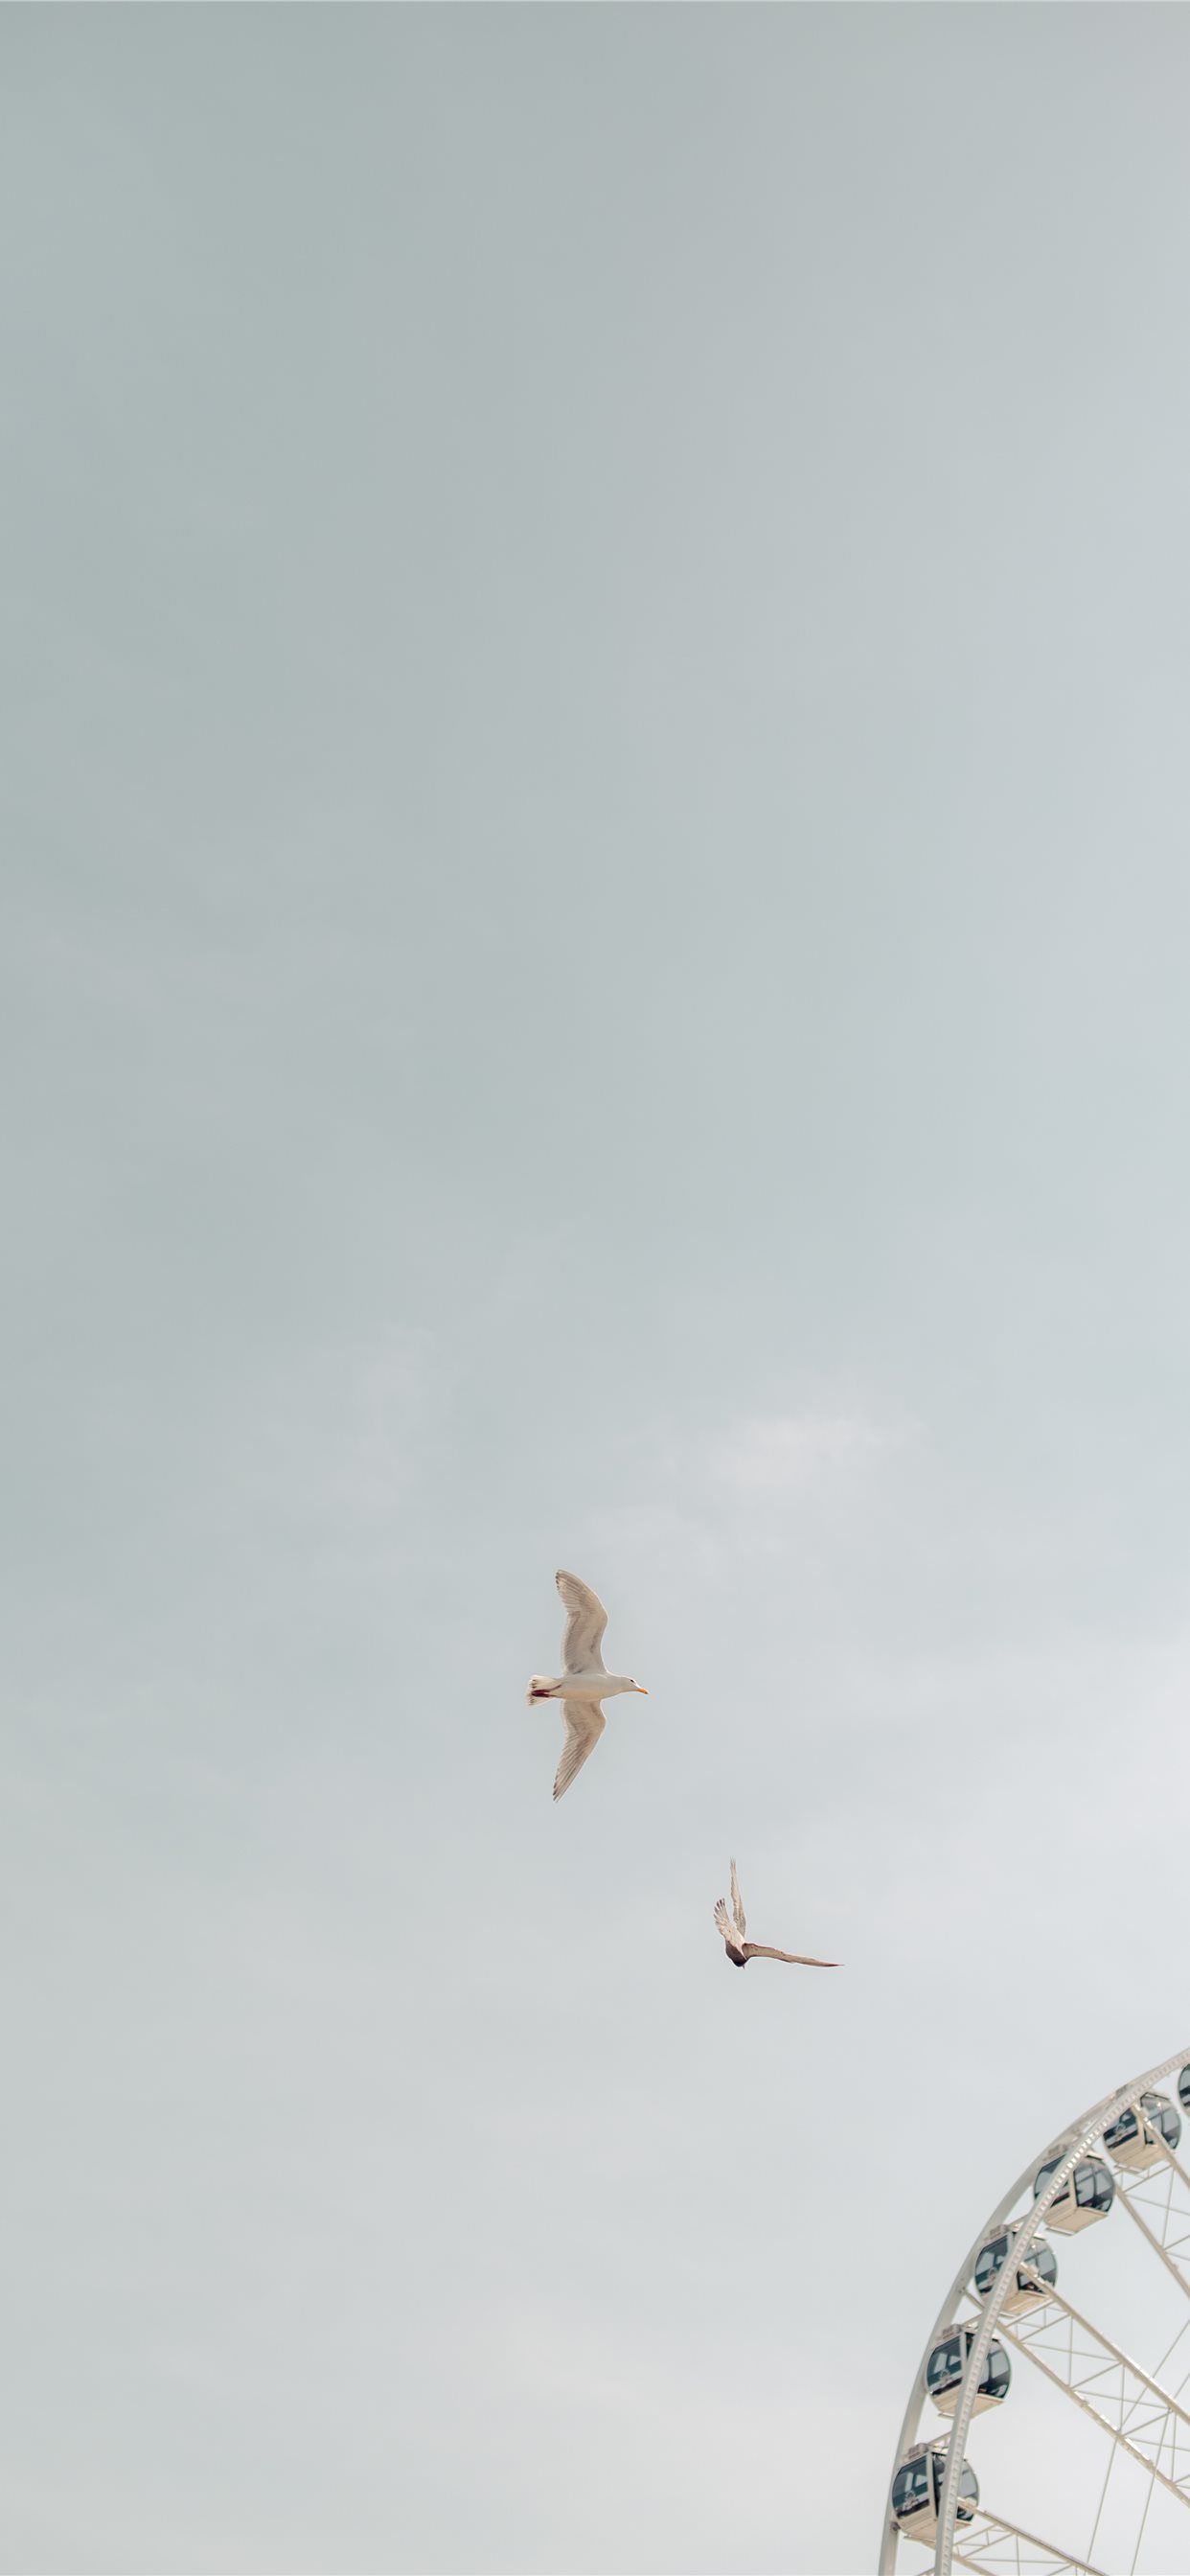 two birds on flight iPhone X Wallpaper Free Download